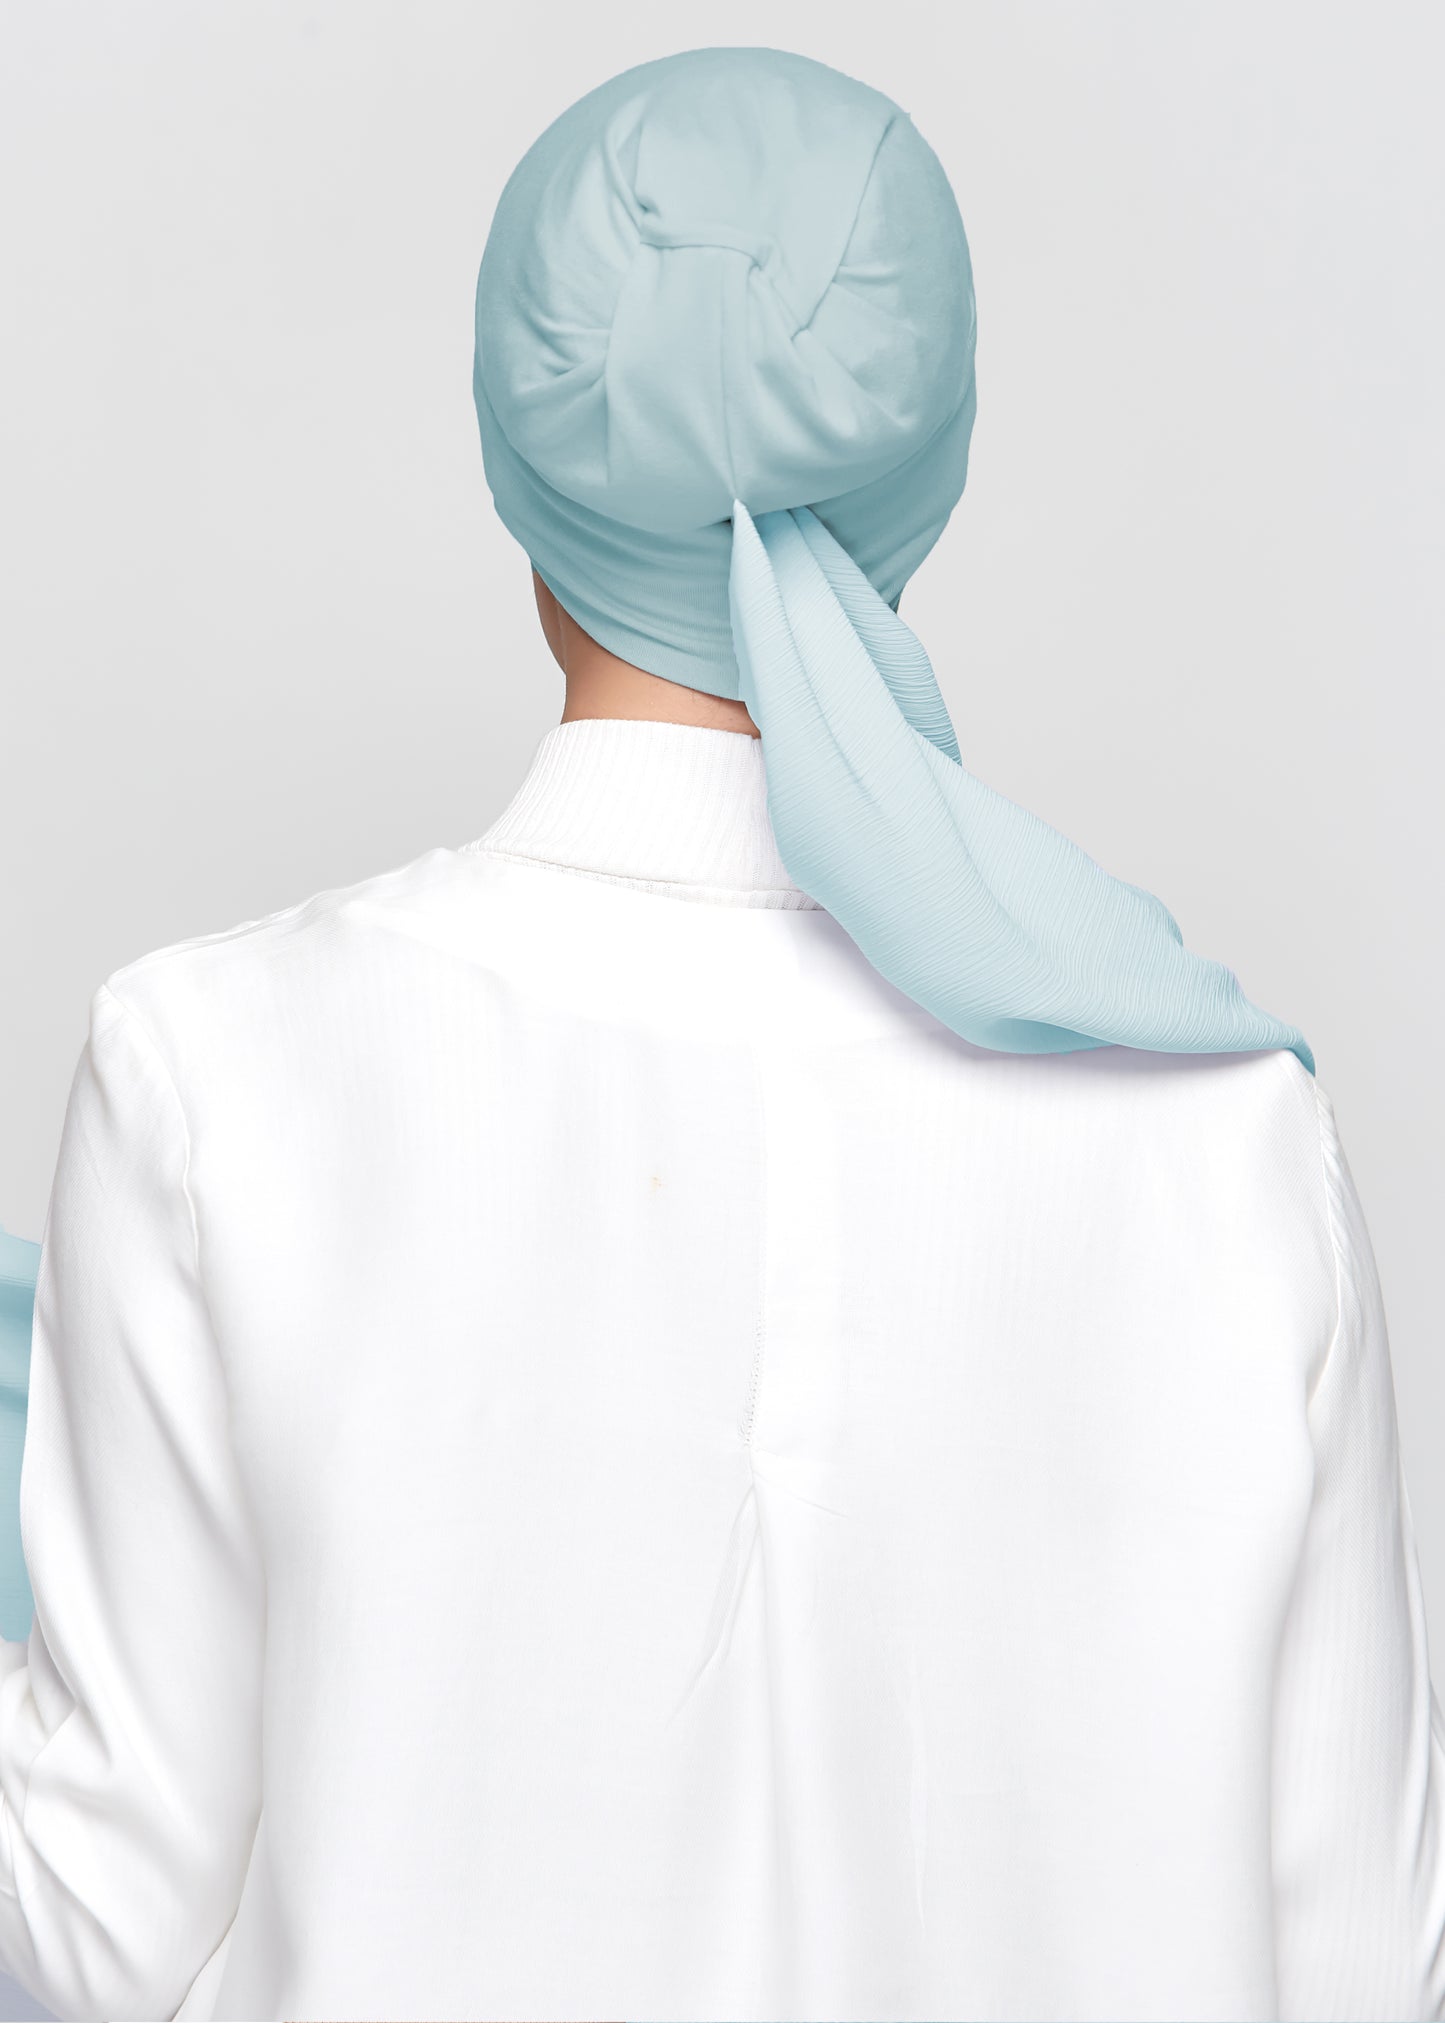 Chiffon Dolce in Ice Baby Blue (Semi-Instant)